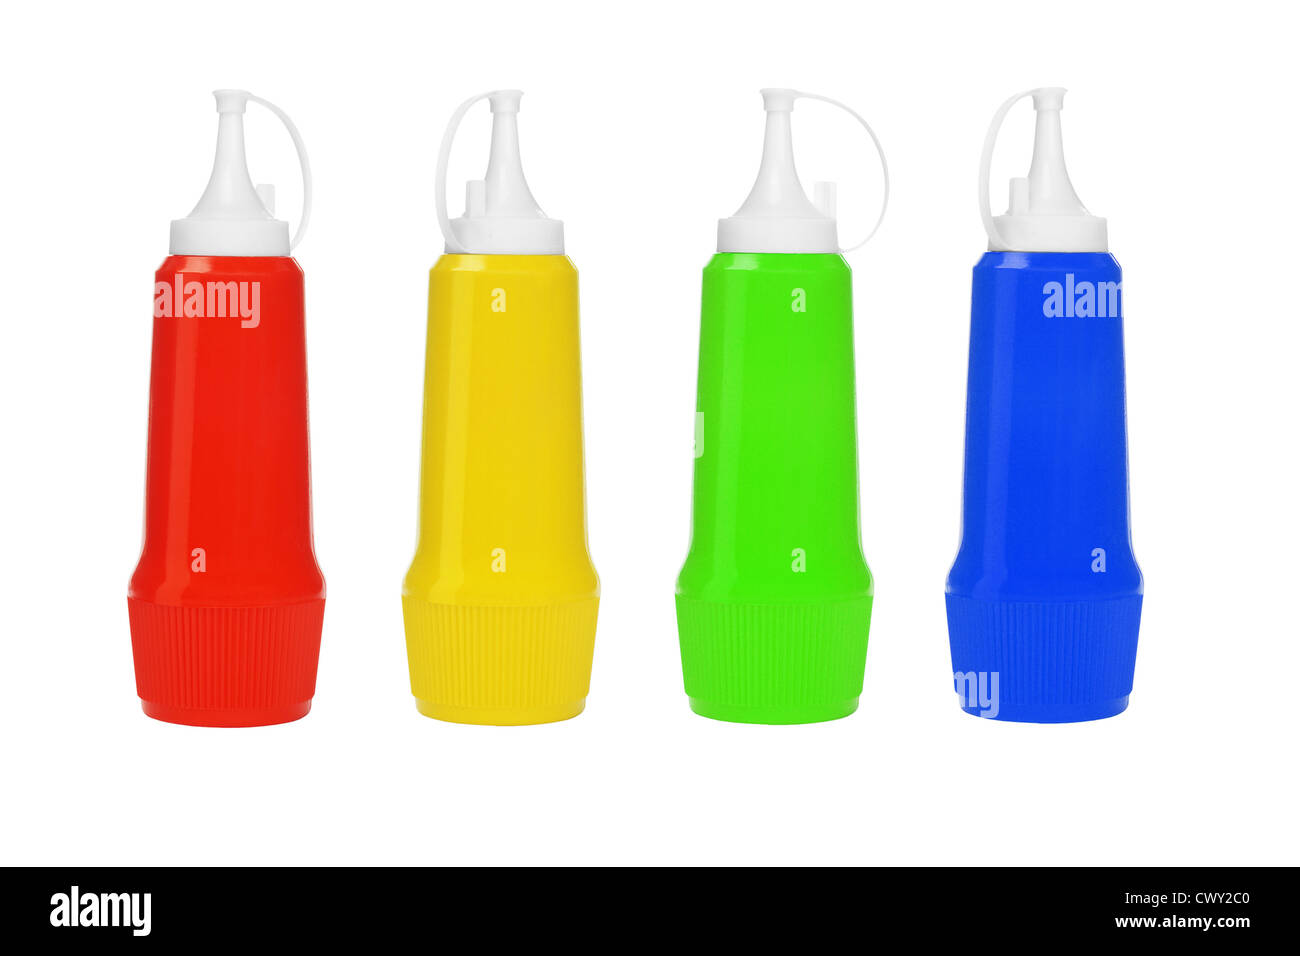 Row of Colorful Plastic Bottles of Sauces on White Background Stock Photo